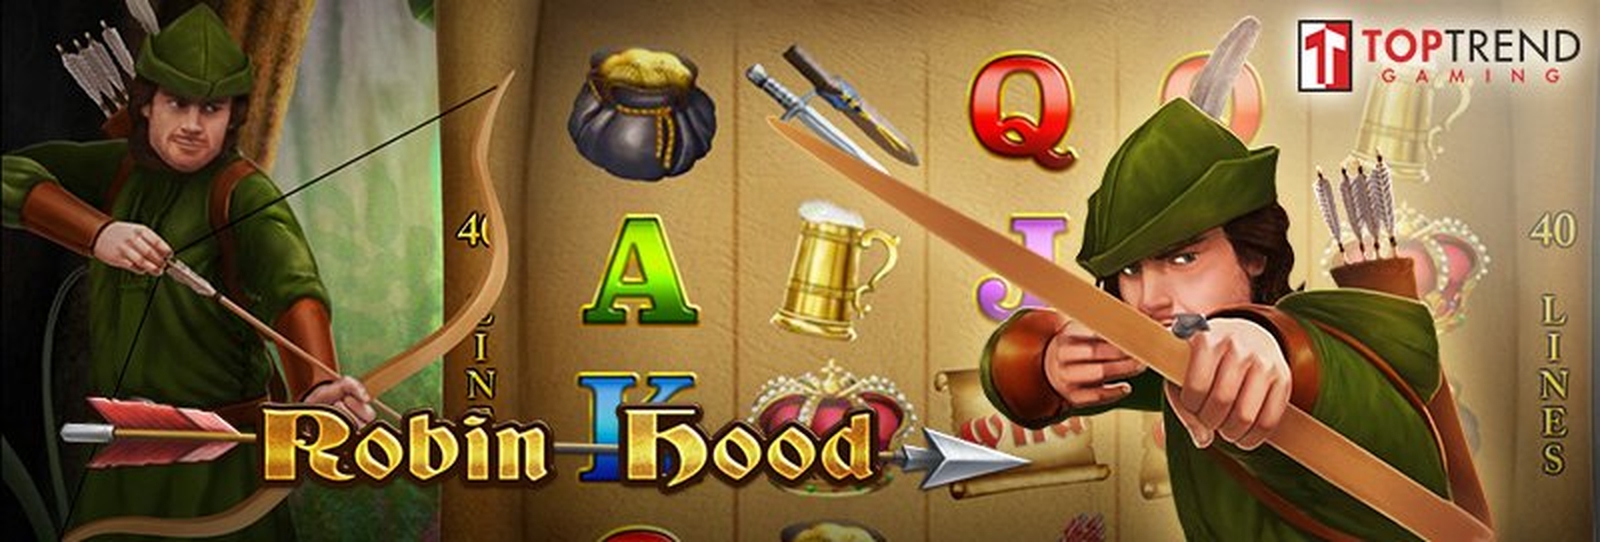 The Robin Hood Online Slot Demo Game by Top Trend Gaming